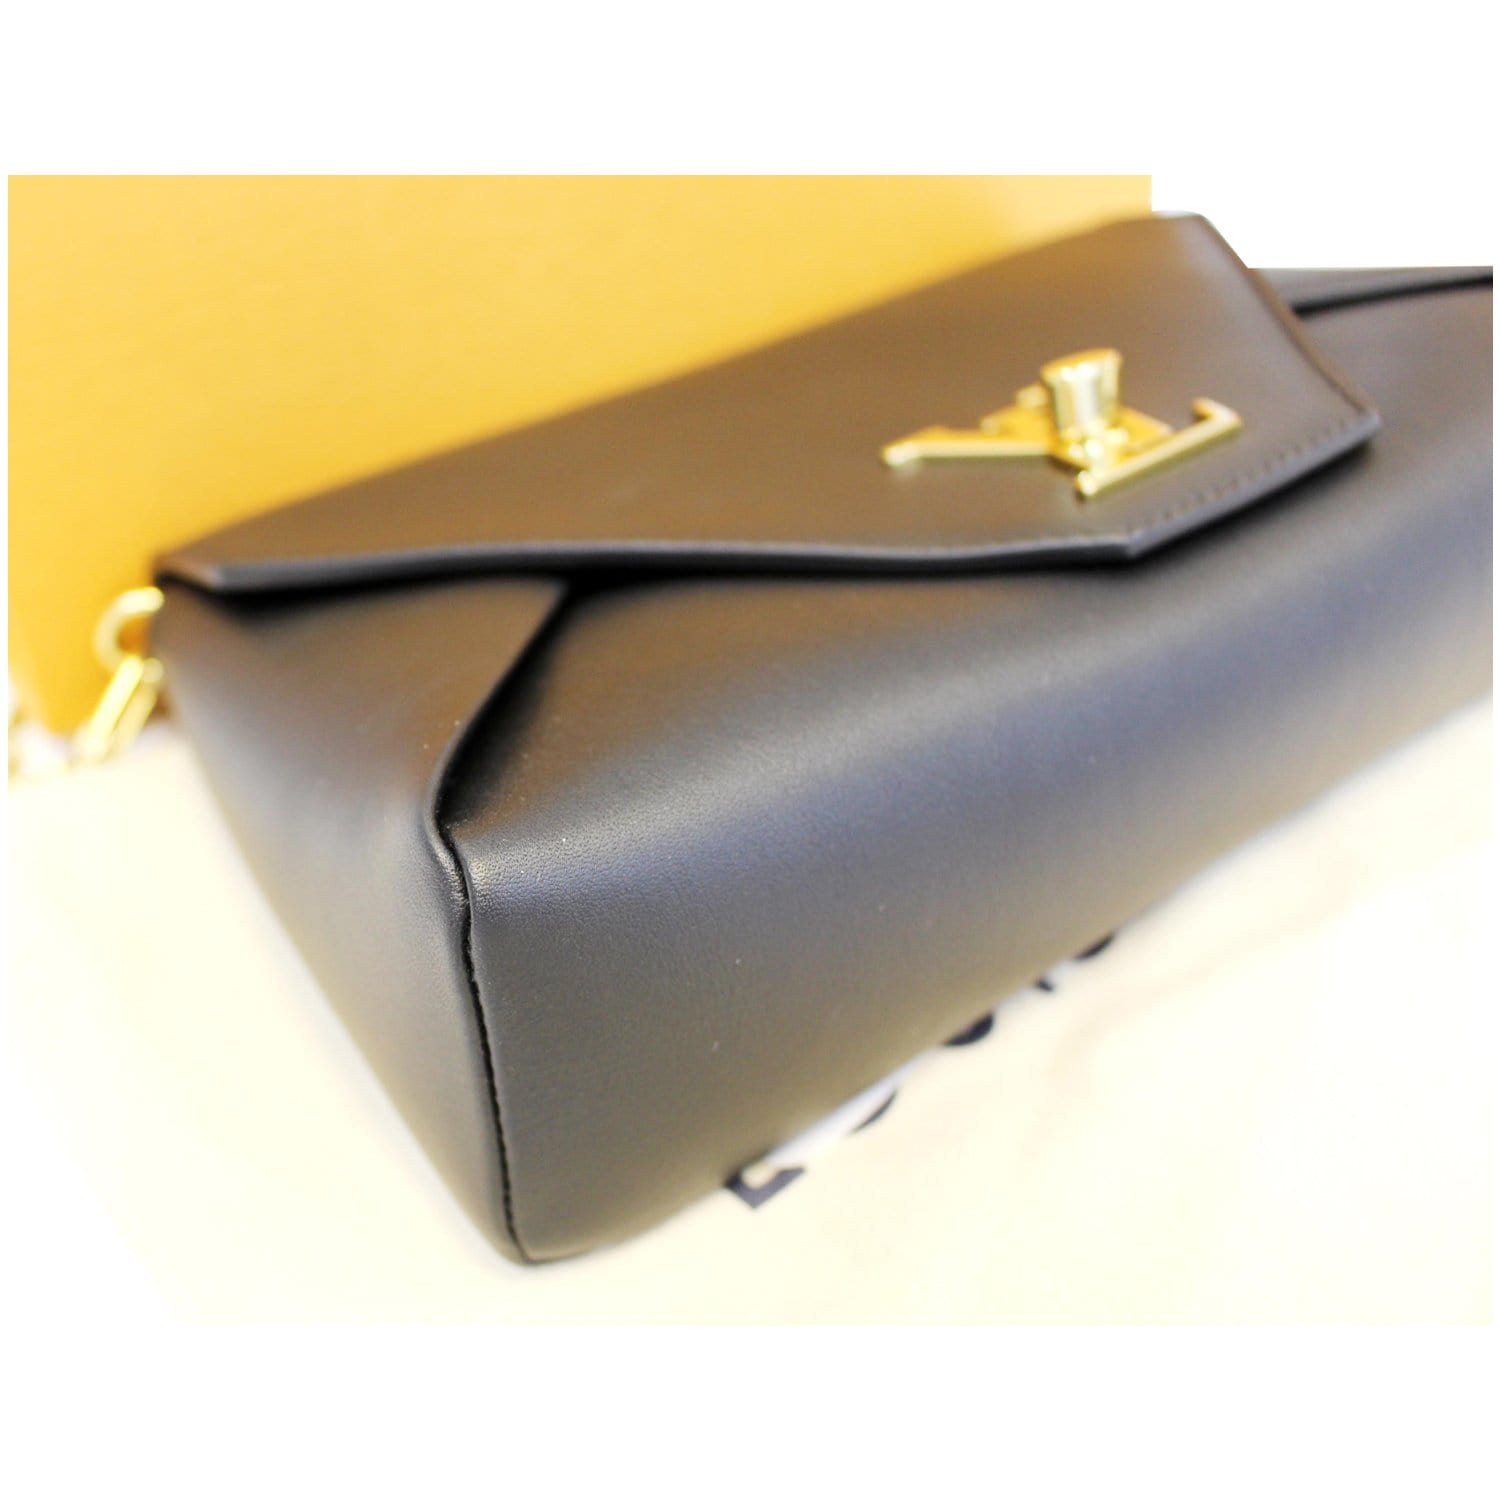 Louis Vuitton Black Calfskin Love Note Bag Gold Hardware, 2017 Available  For Immediate Sale At Sotheby's